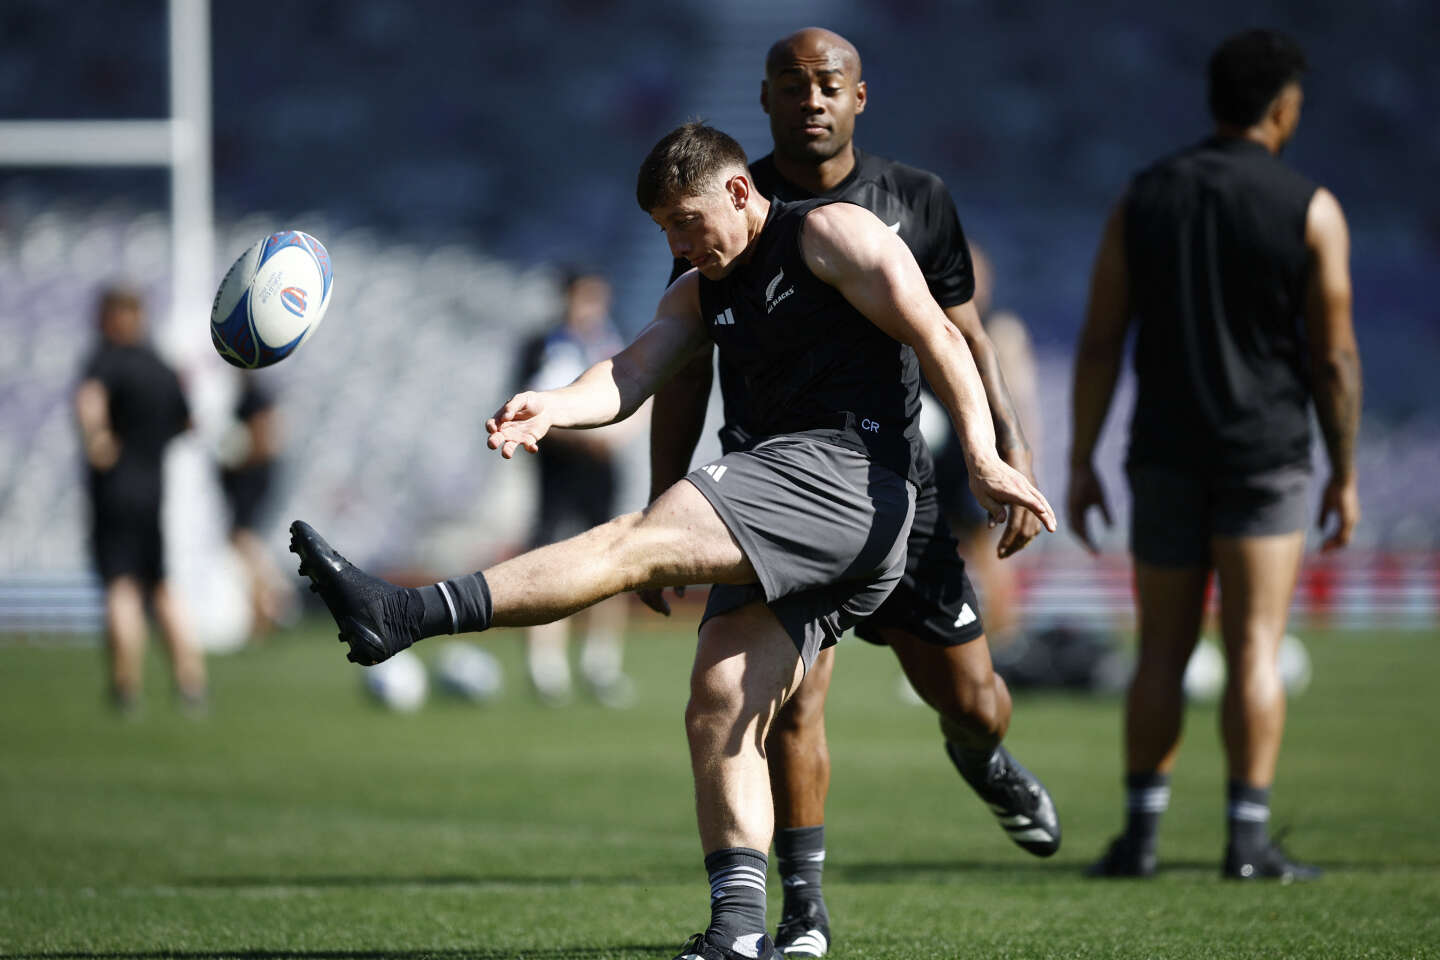 New Zealand intends to find its compass against Namibia